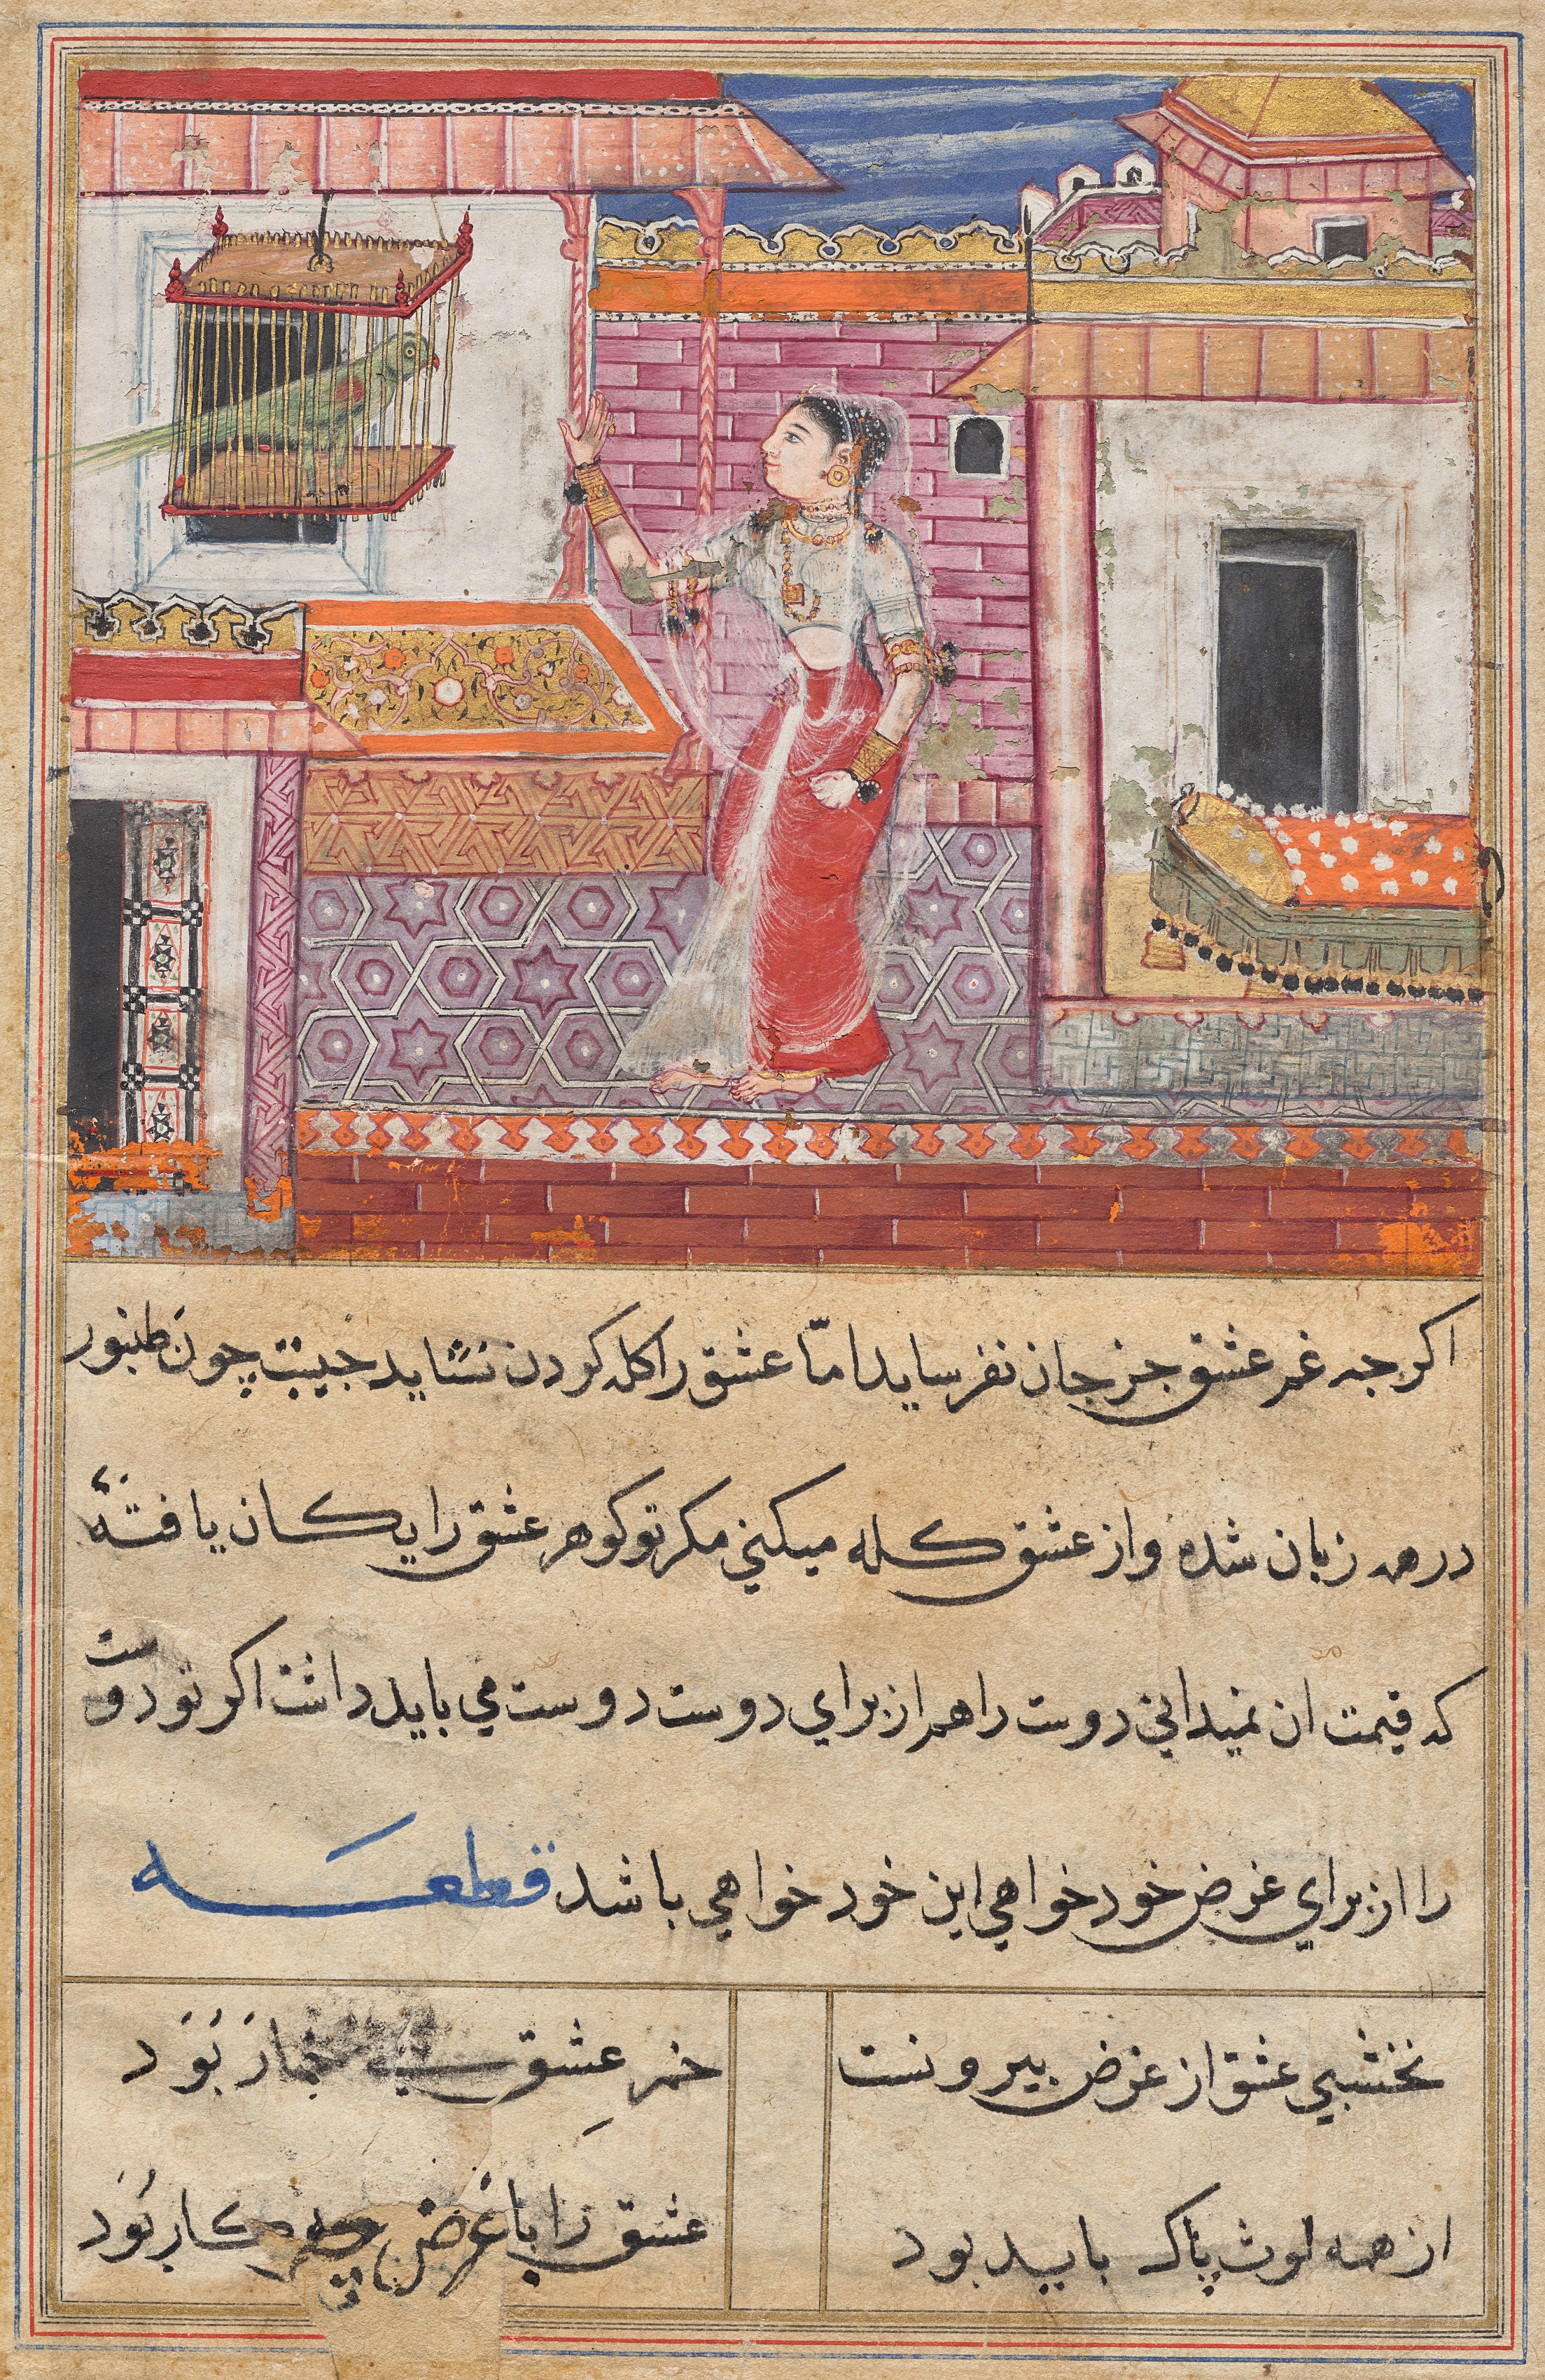 The Parrot Addresses Khujasta at the Beginning of the Thirteenth Night, from a Tuti-nama (Tales of a Parrot)